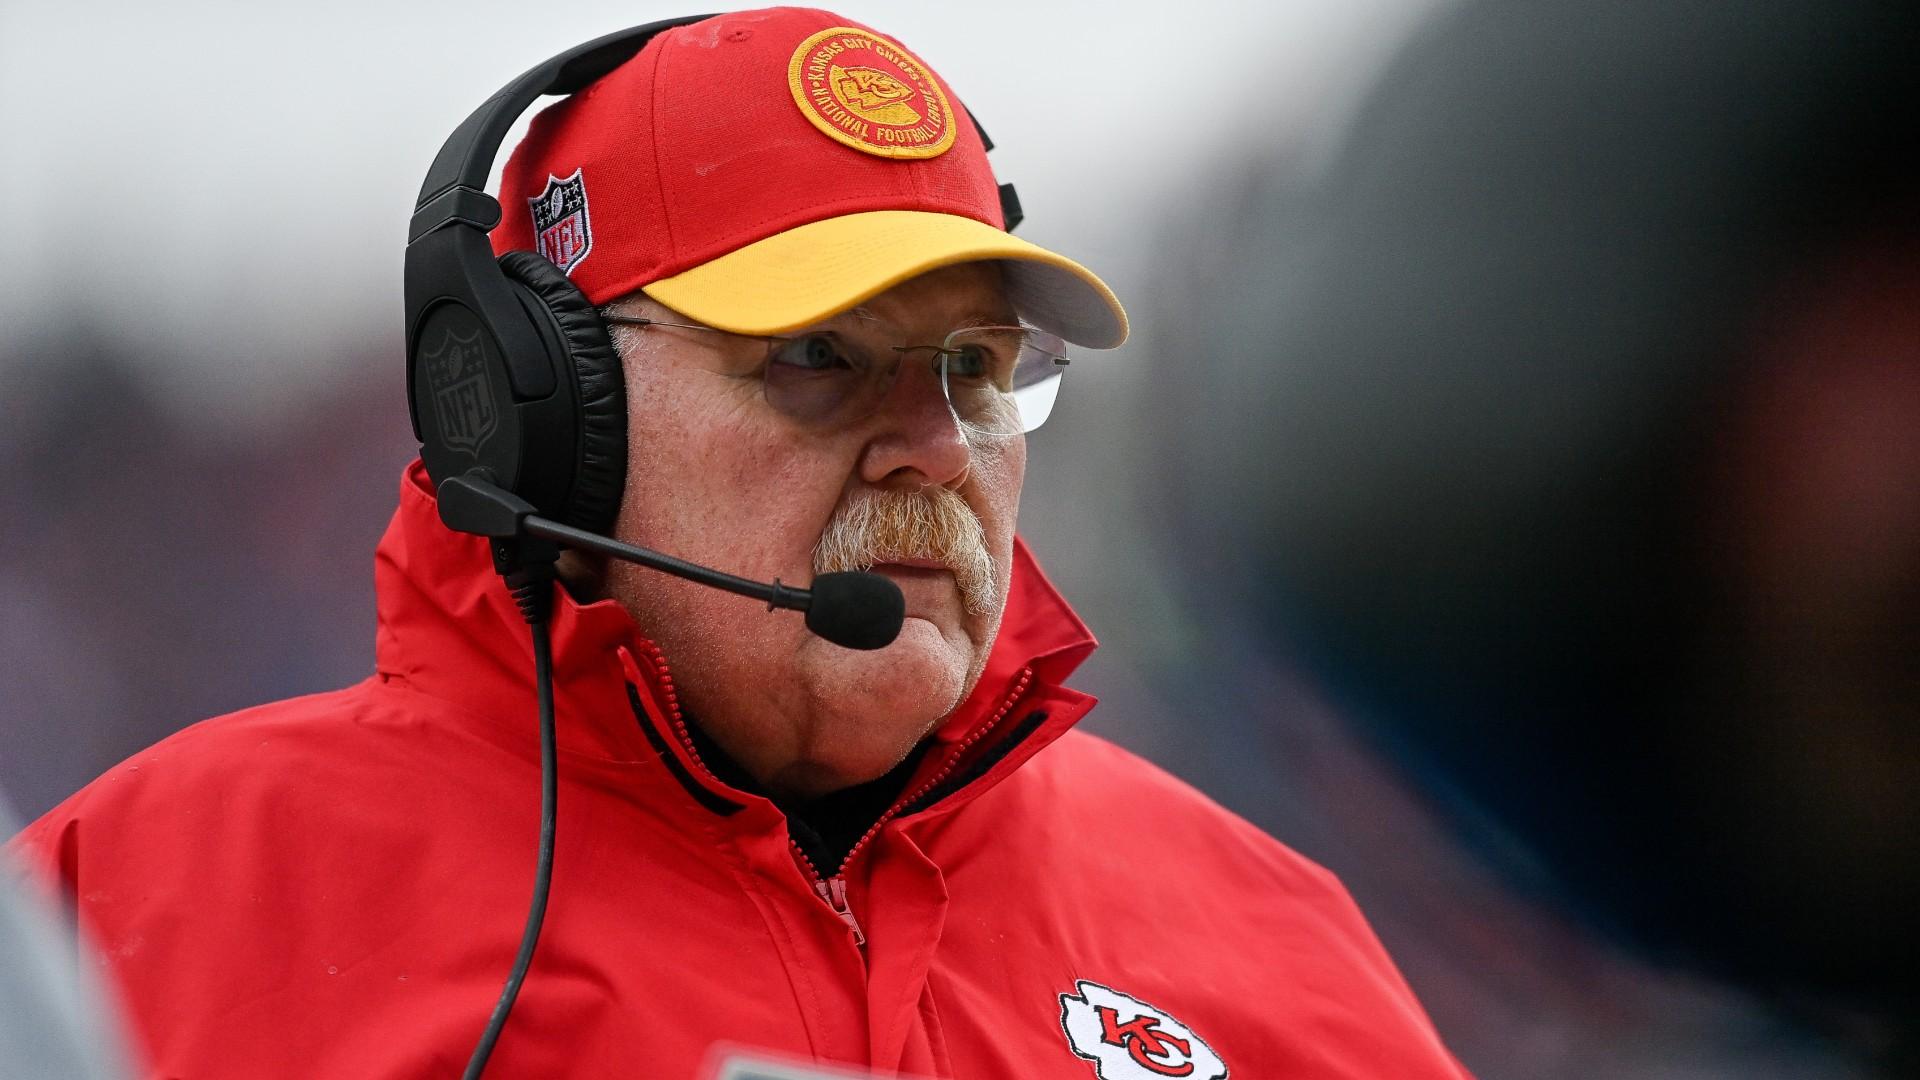 The Secret Behind Andy Reid's Success Big Butts in the NFL